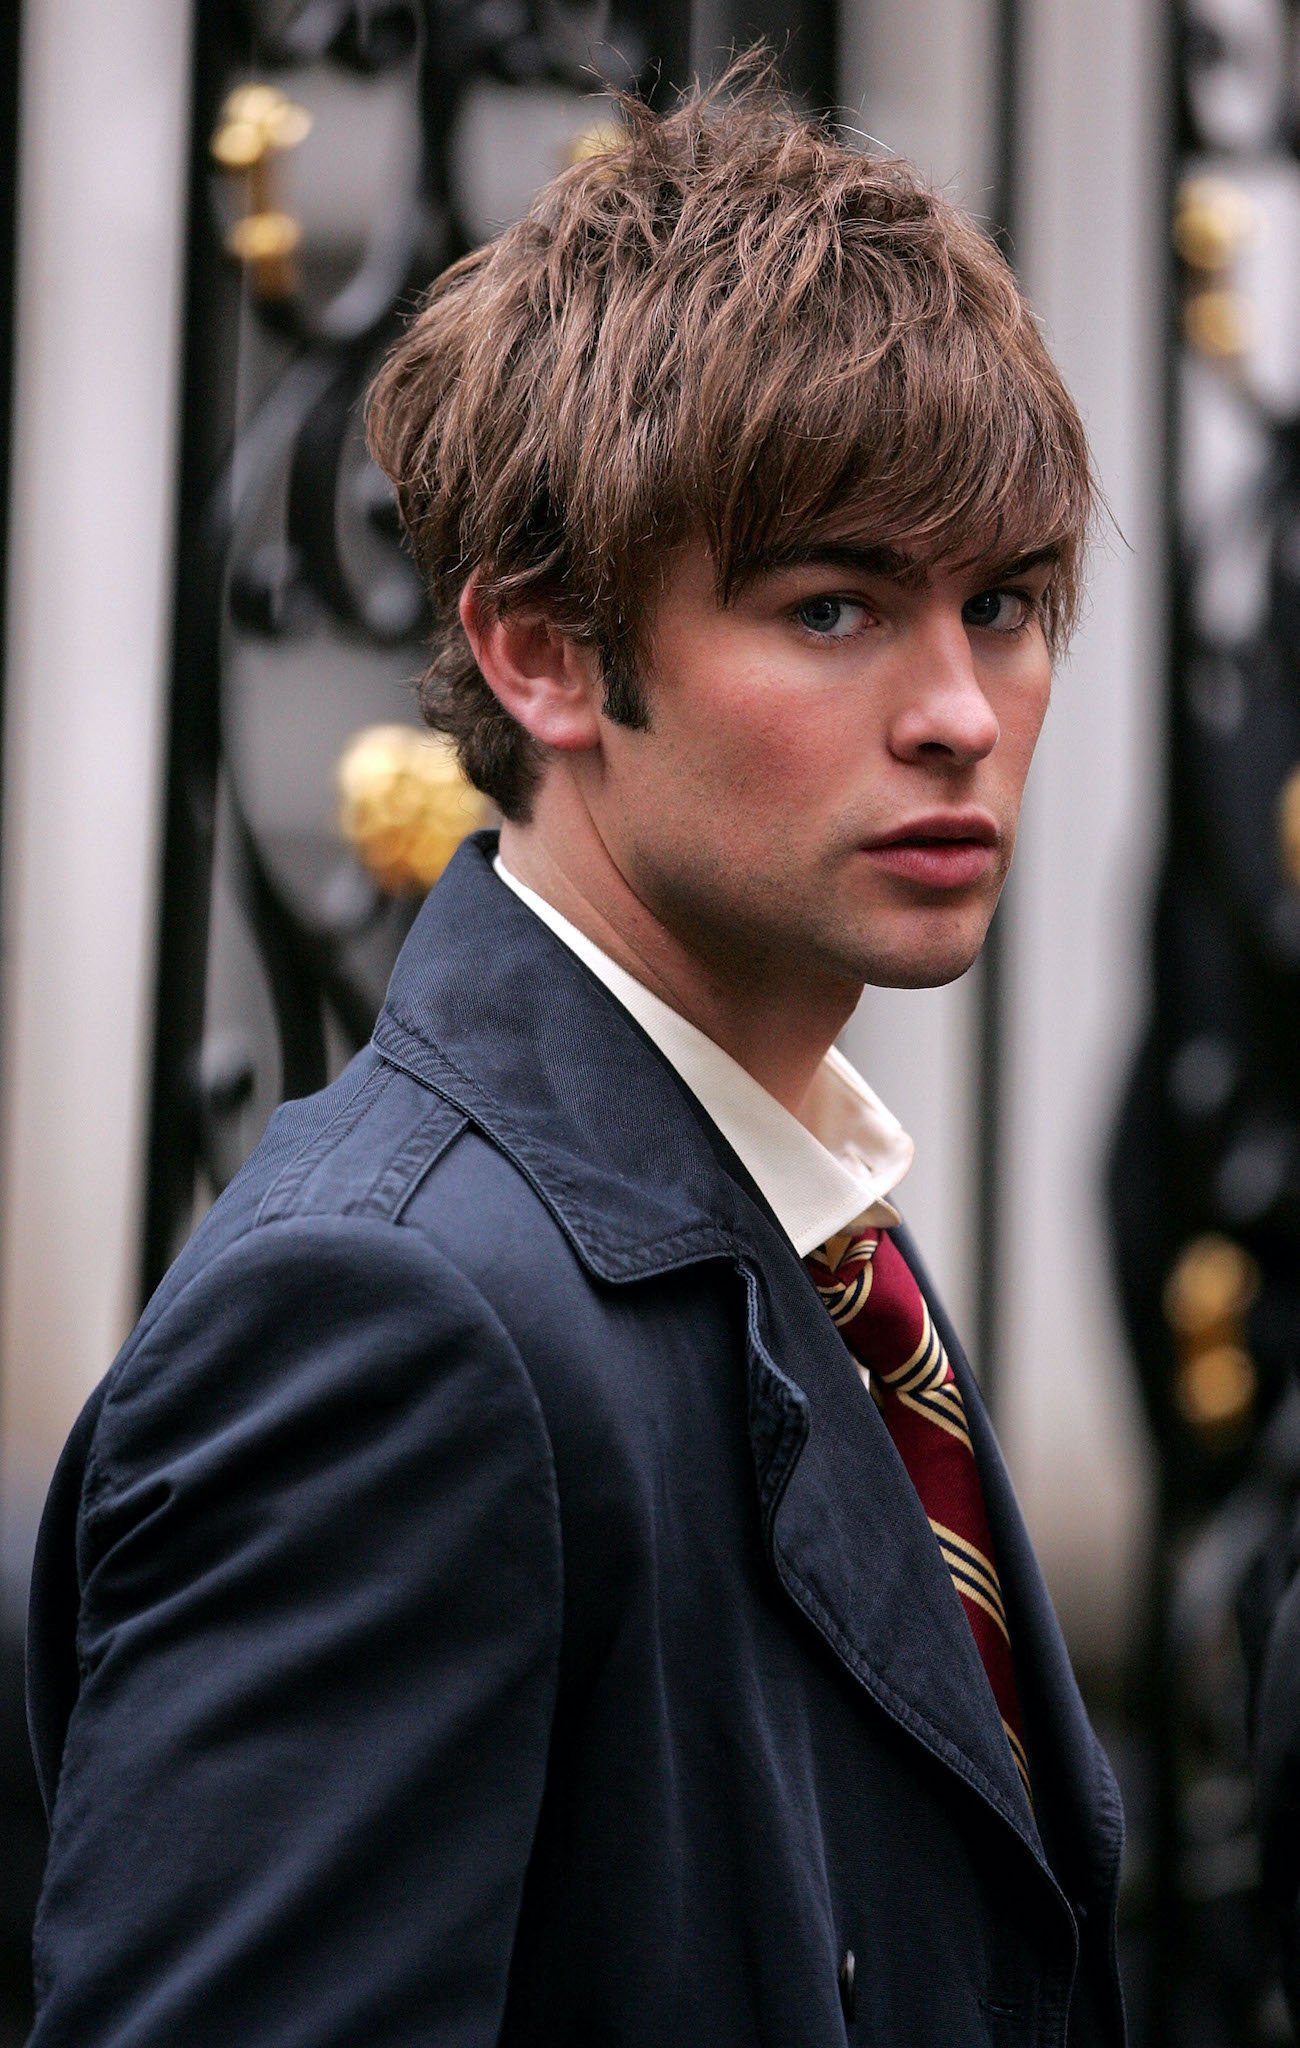 Chace Crawford as Nate Archibald on 'Gossip Girl'